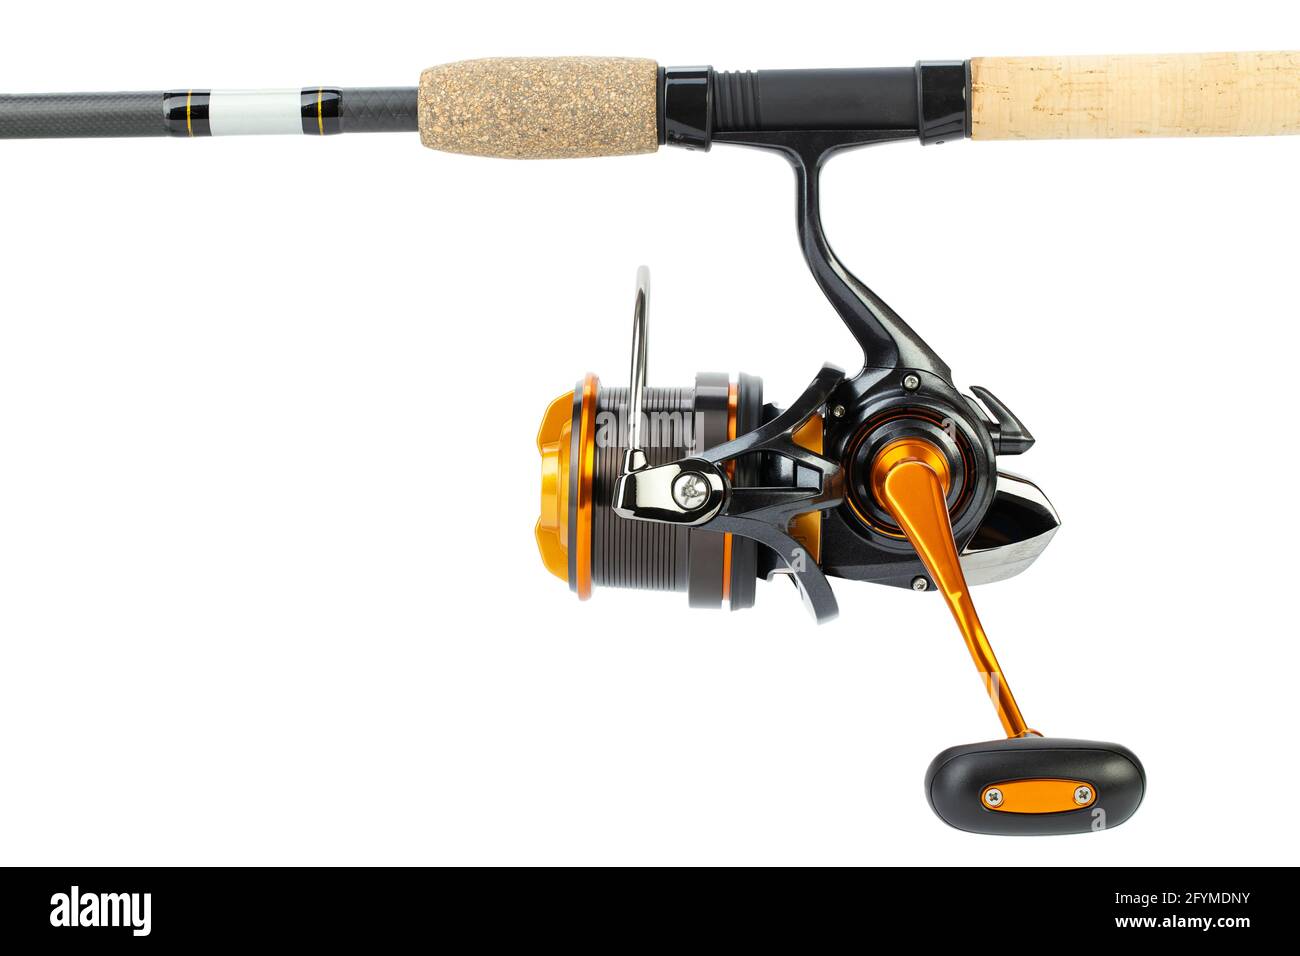 The fishing reel is mounted on a fishing rod for catching bream